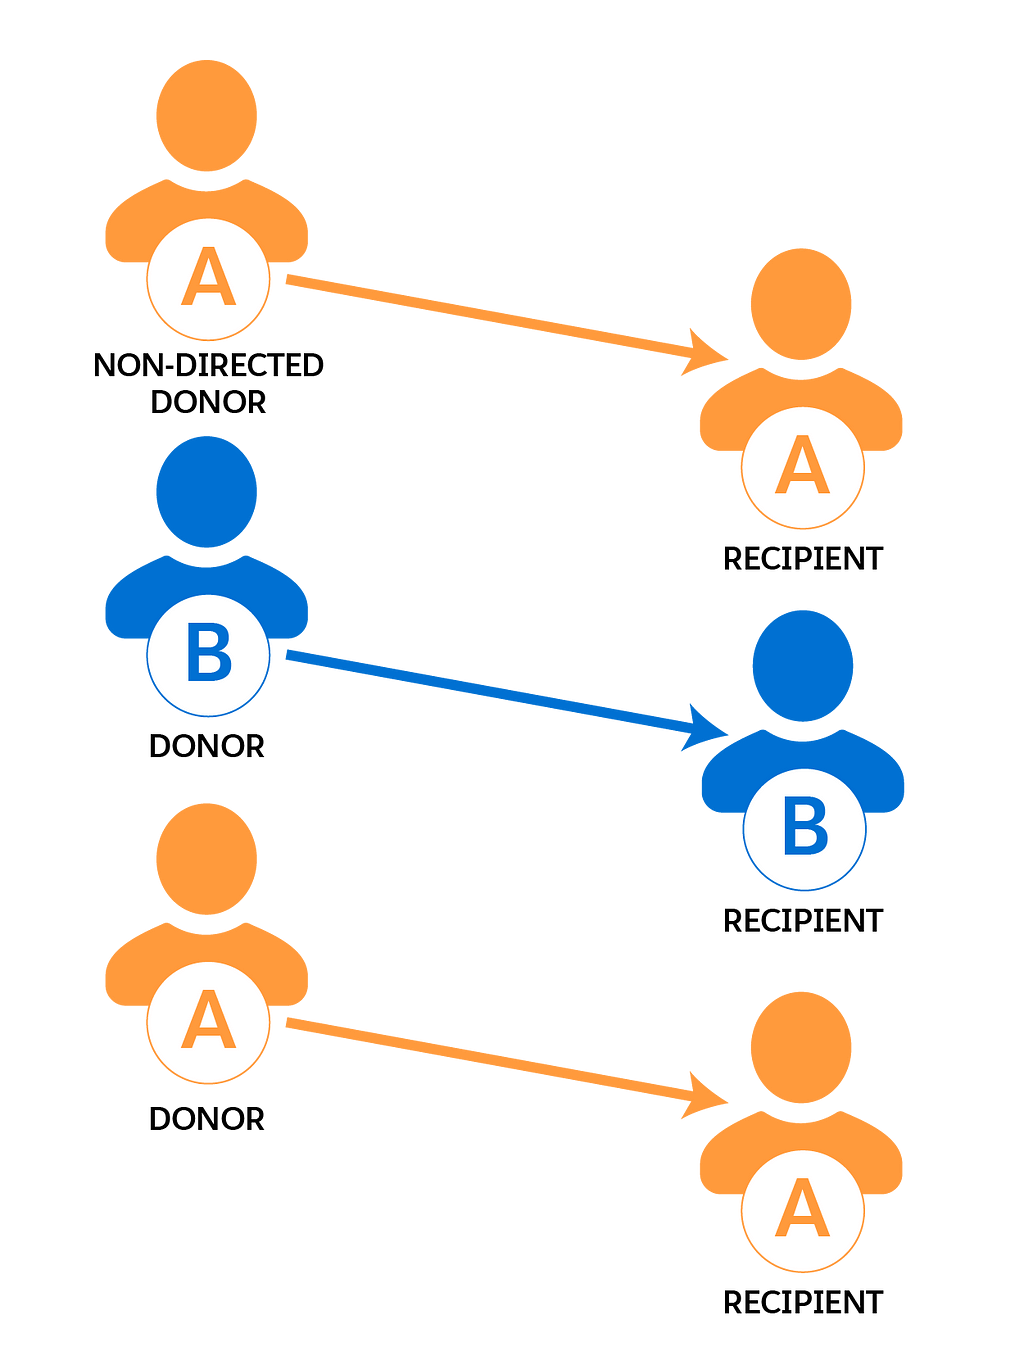 A diagram showing a simplified view of identifying donors